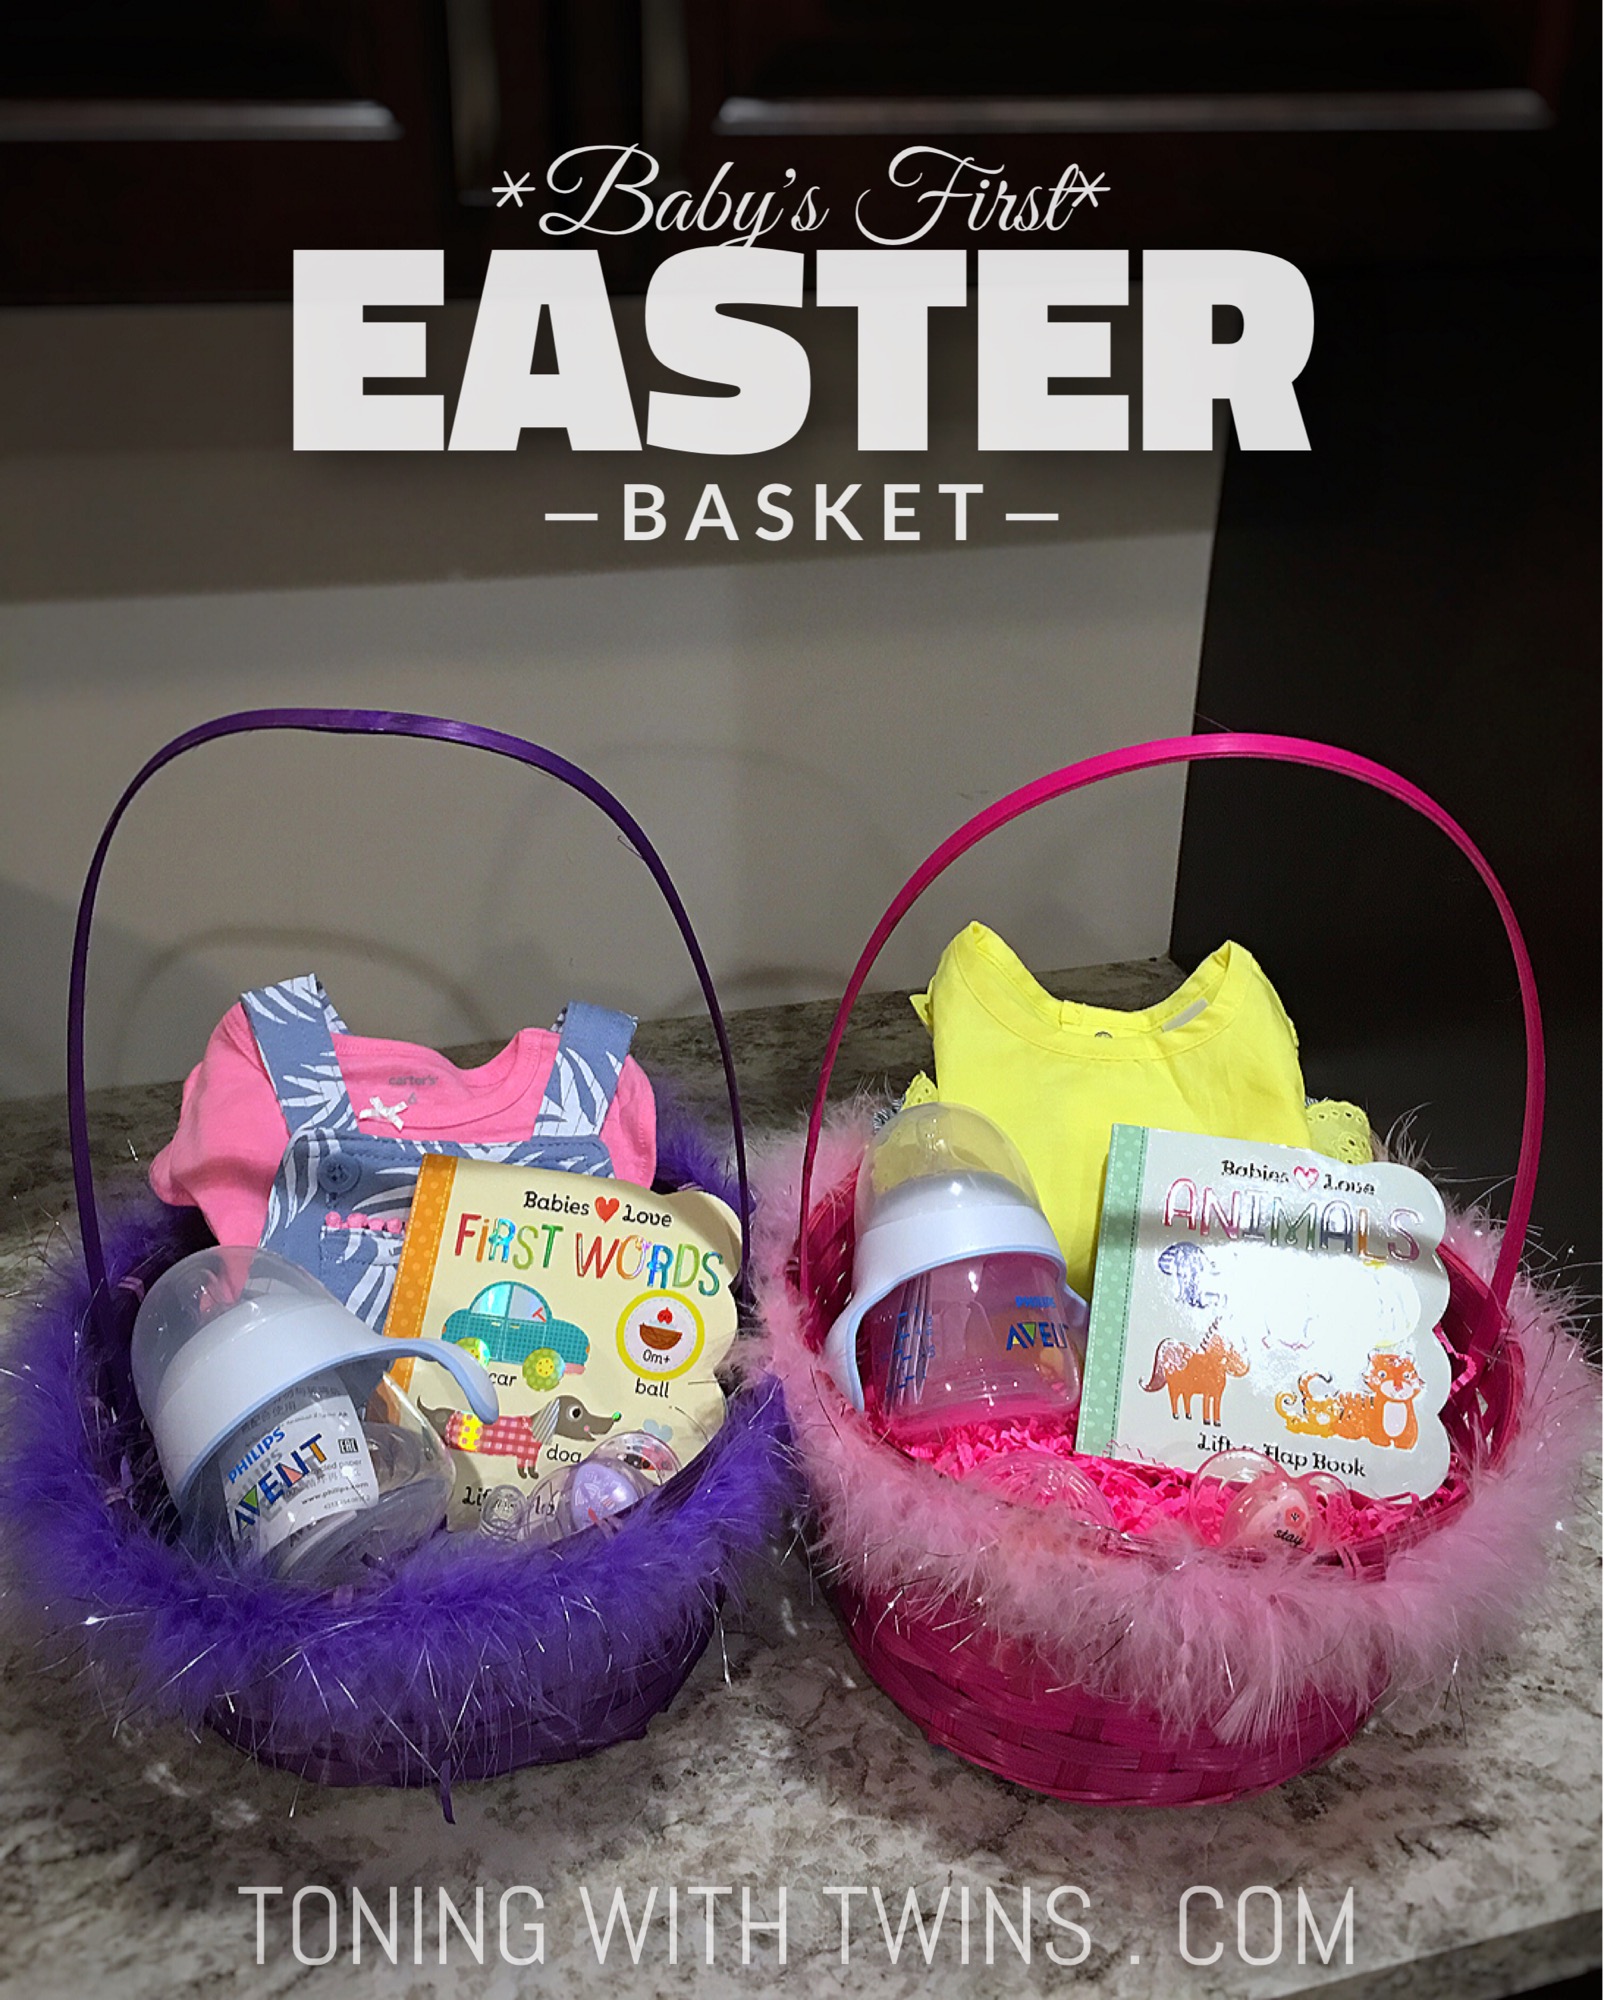 What Do You Put in a Baby's First Easter Basket? – Toning With Twins